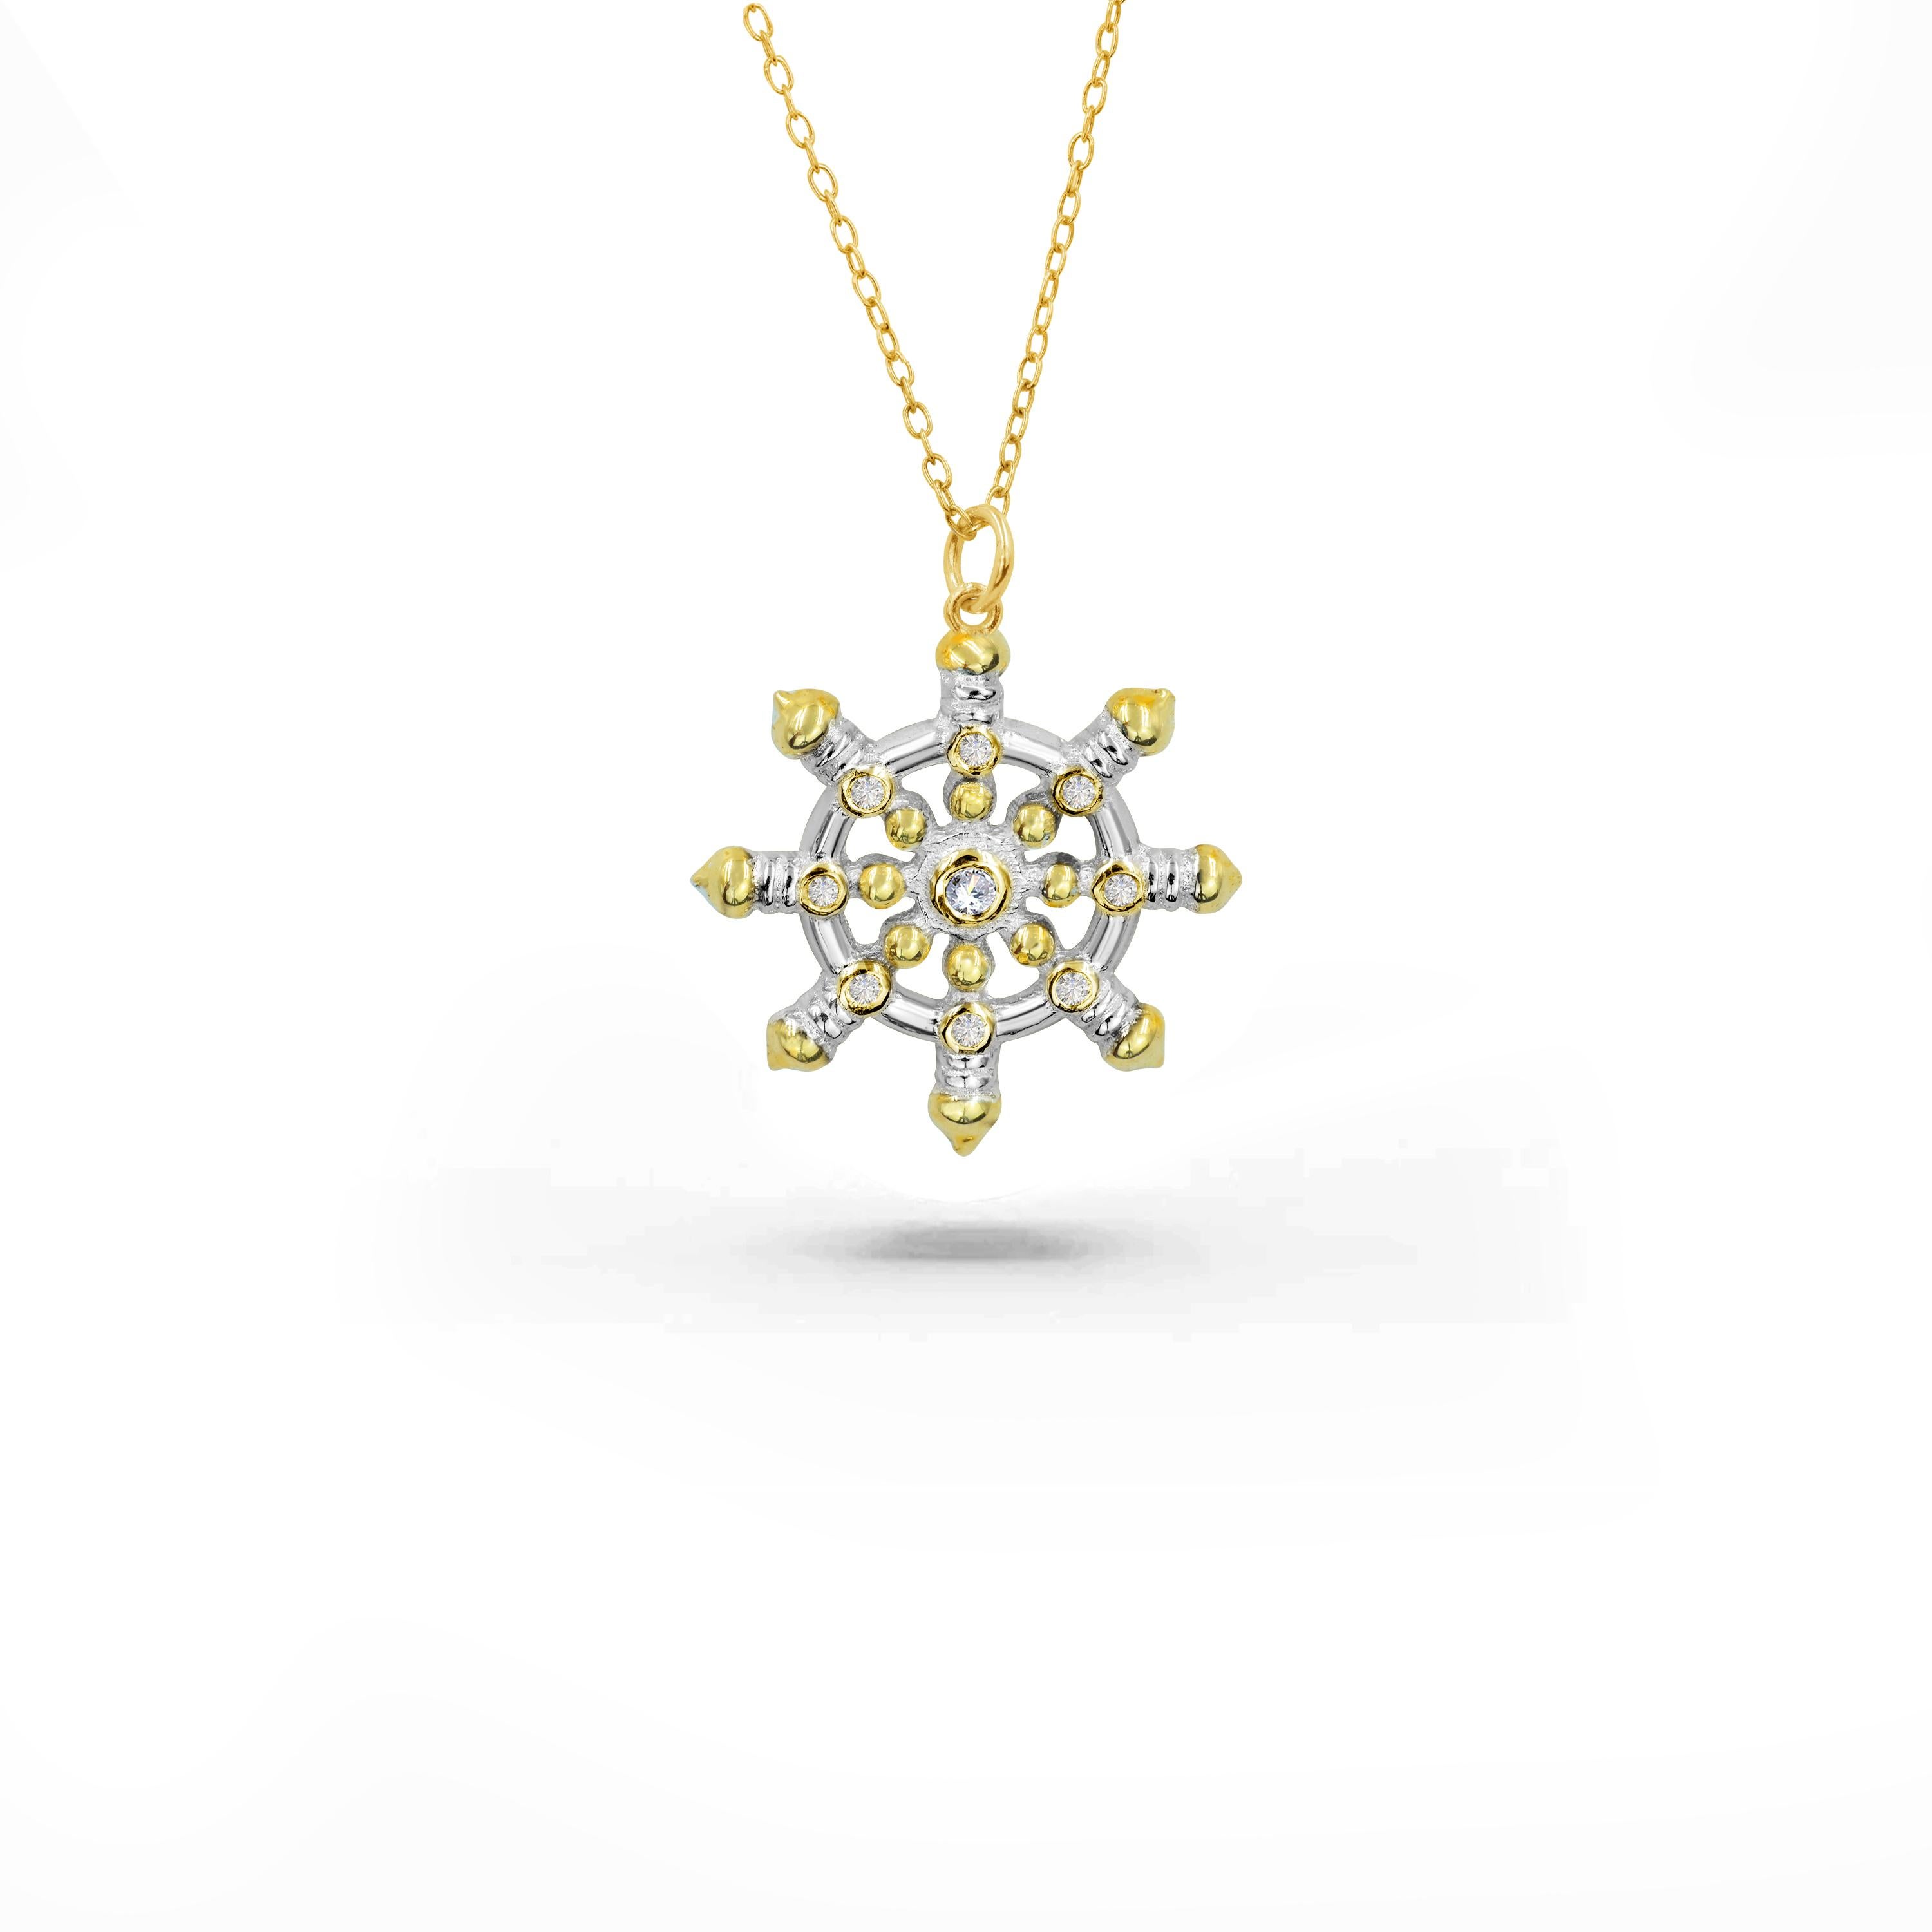 The handcrafted diamond Dharma wheel necklace is perfect everyday wear to bring inner peace and spirituality. We guarantee top-notch quality with 0.05 carat of diamonds beautifully set into this necklace. This Buddhism necklace can be customized on